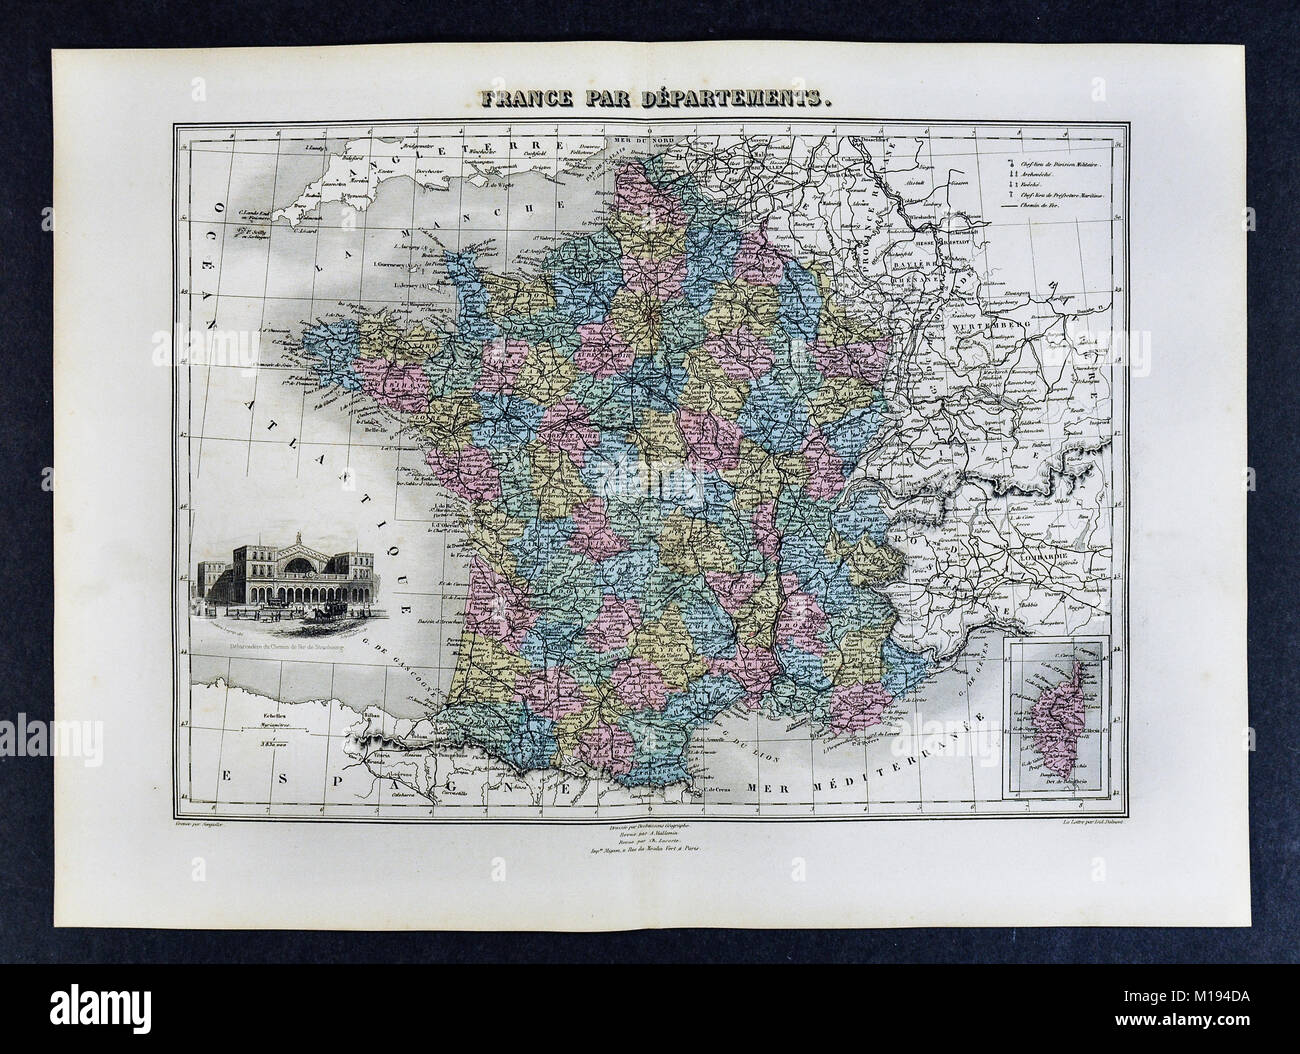 1877 Migeon Map - France in Departments - Paris Stock Photo